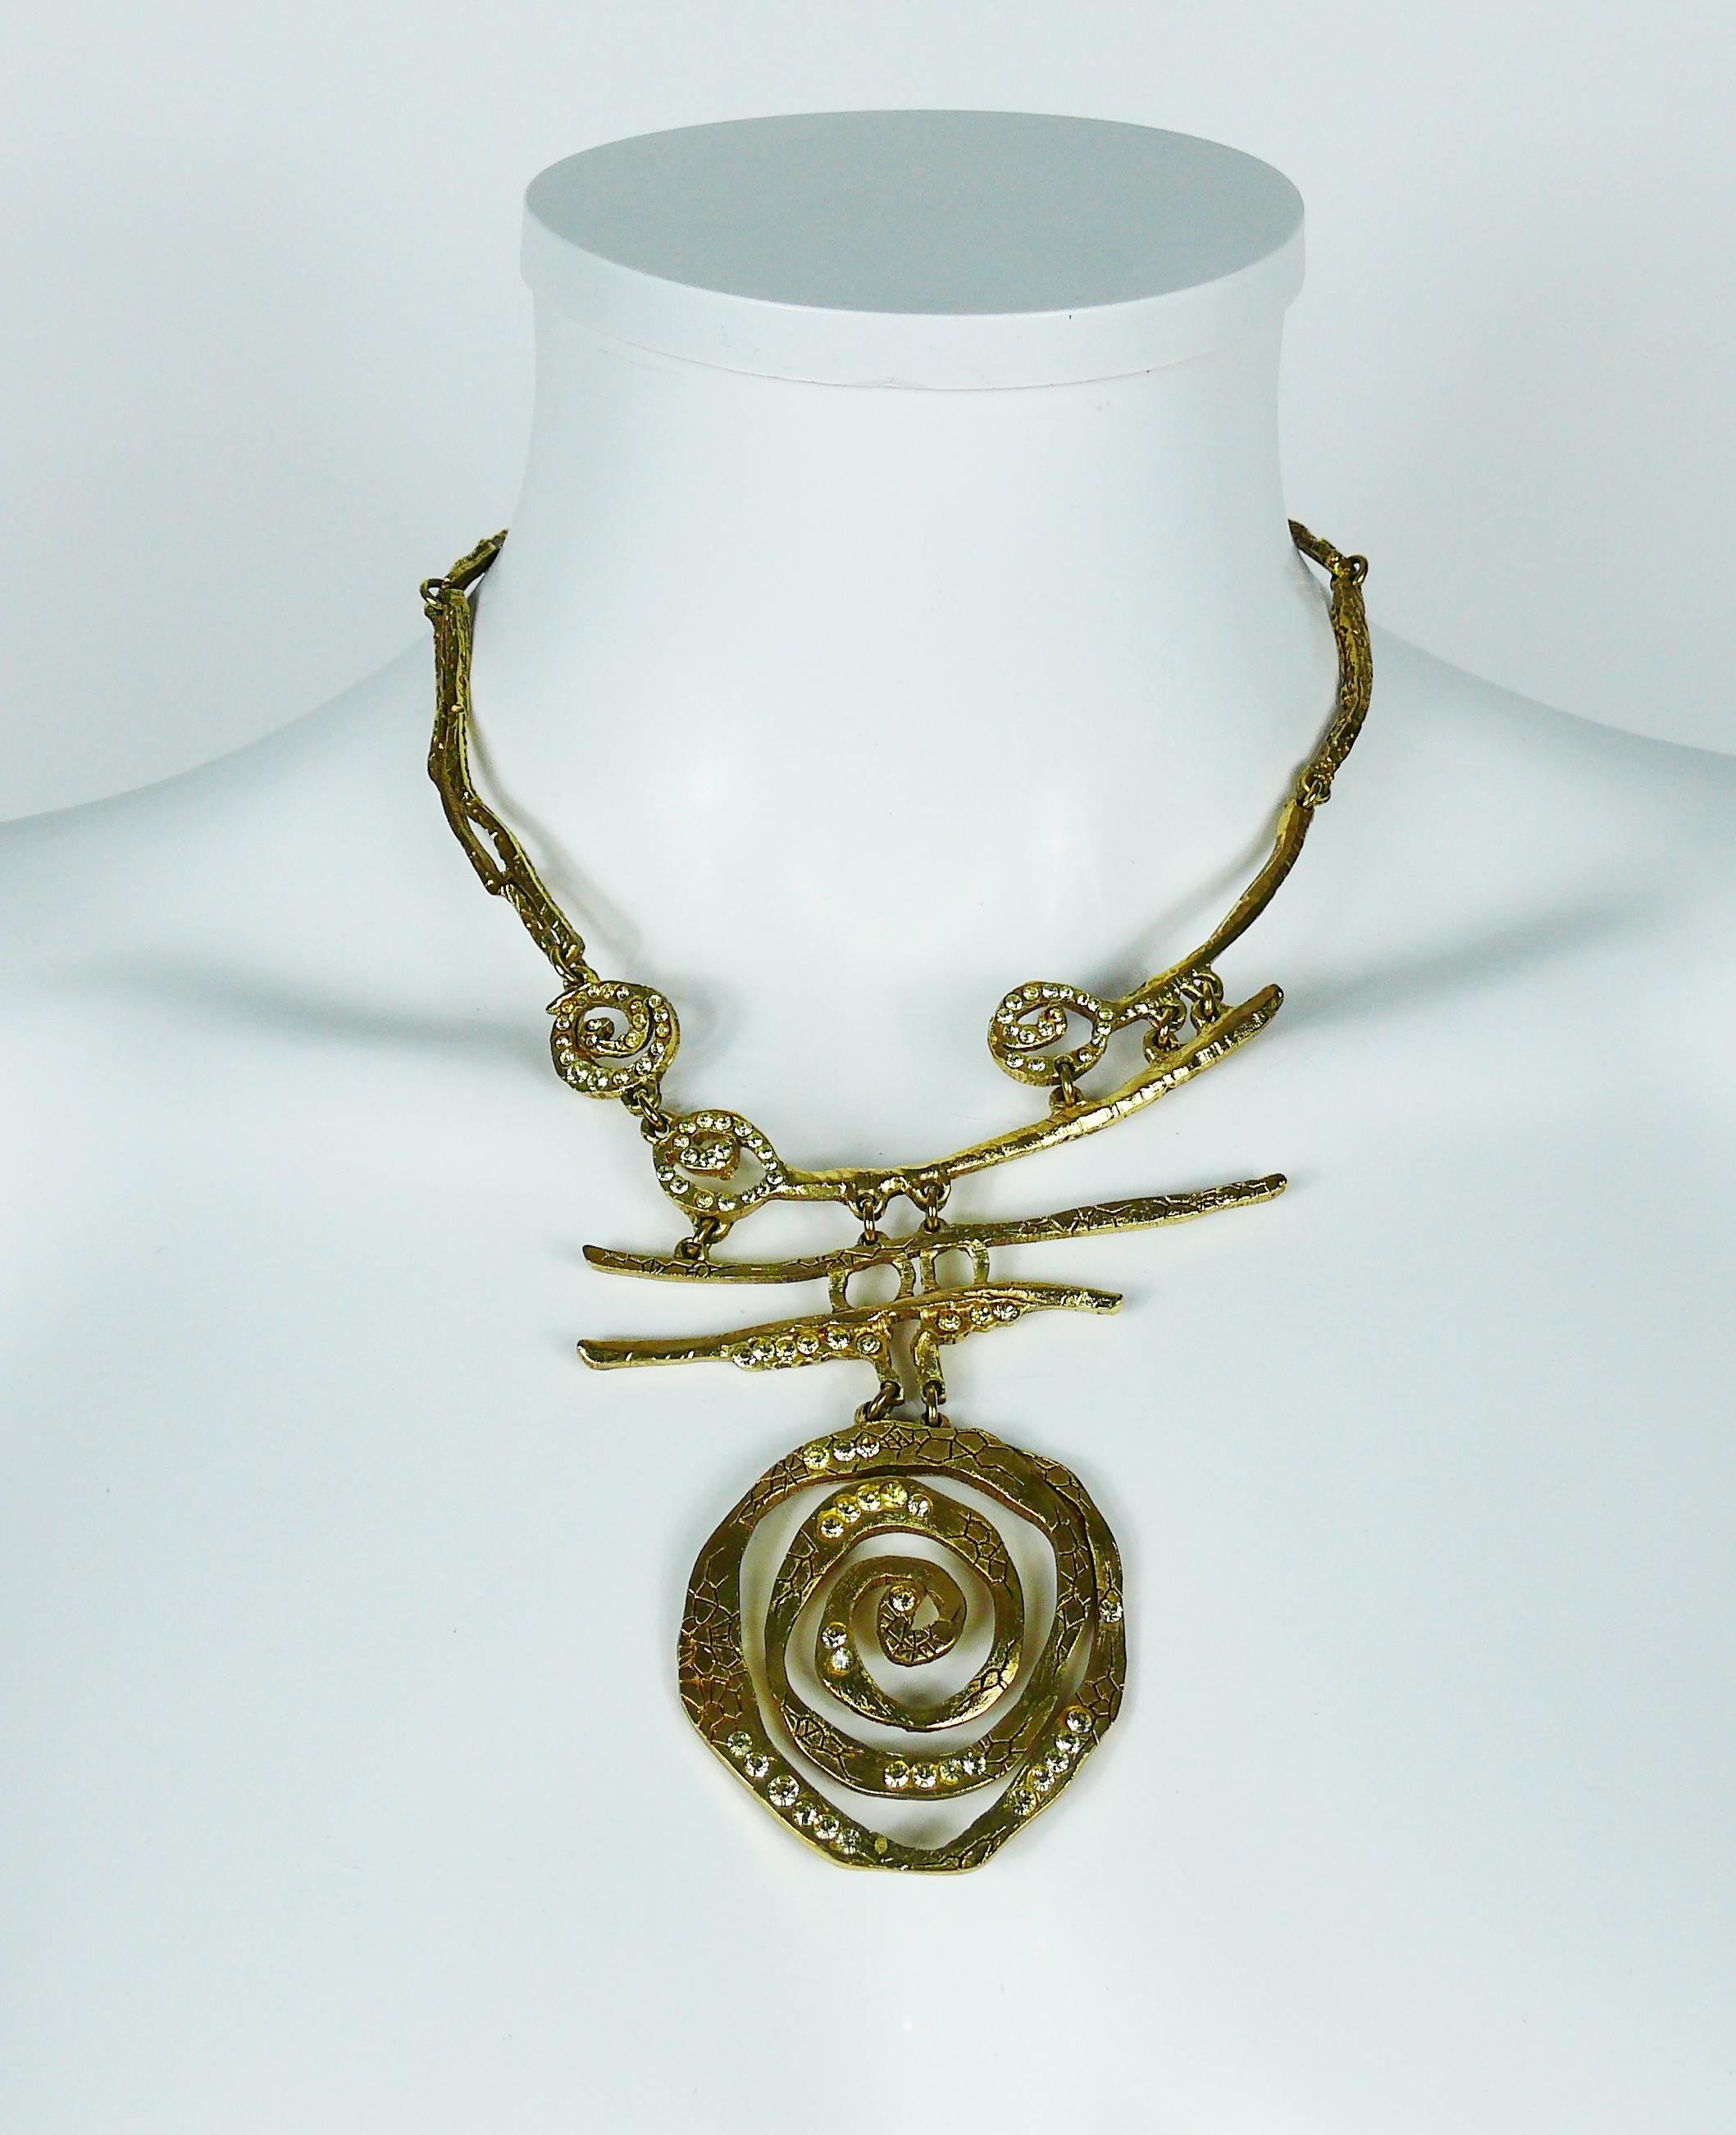 CHRISTIAN LACROIX vintage abstract gold toned necklace featuring a spiral pendant with crystal embellishement.

Marked CHRISTIAN LACROIX CL Made in France.

Indicative measurements : max. length approx. 40 cm (15.75 inches) / adjustable length